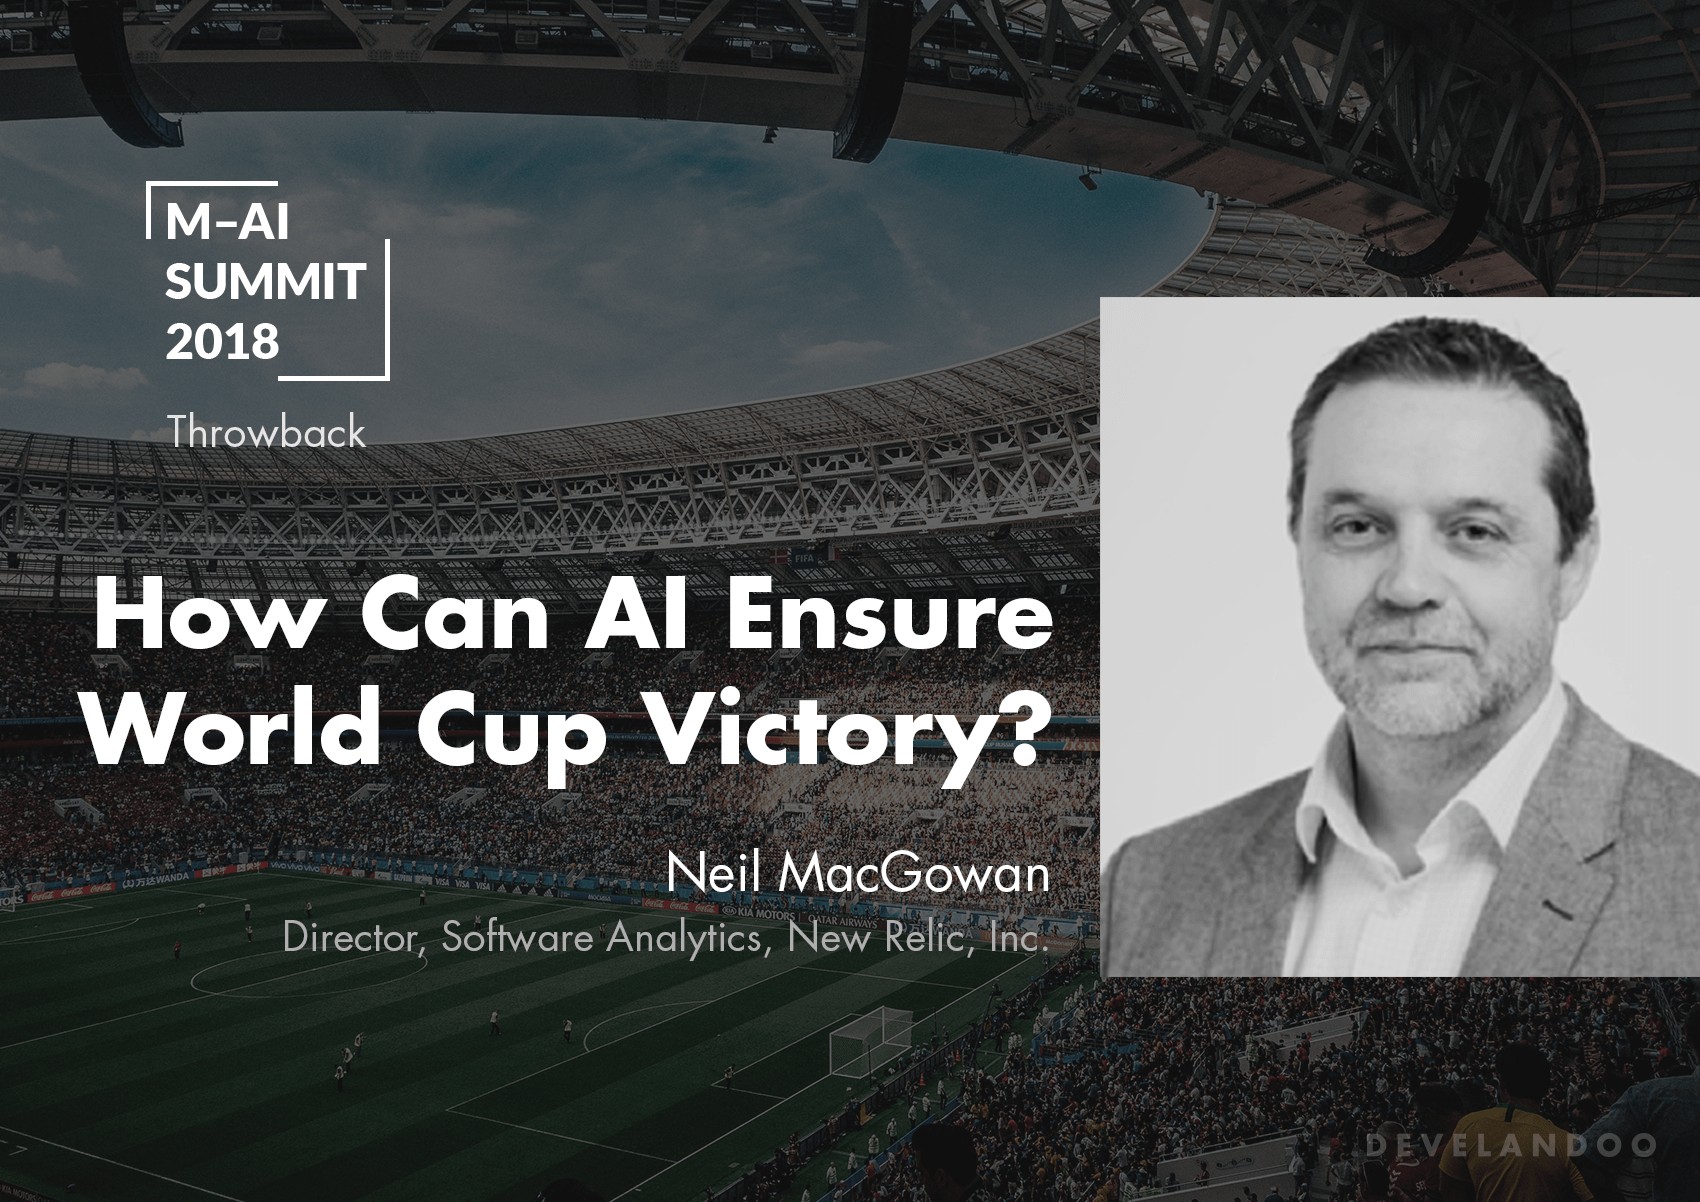 Even FIFA Goes Digital. Neil Macgowan speaks about the success of World Cup big business through Artificial Intelligence